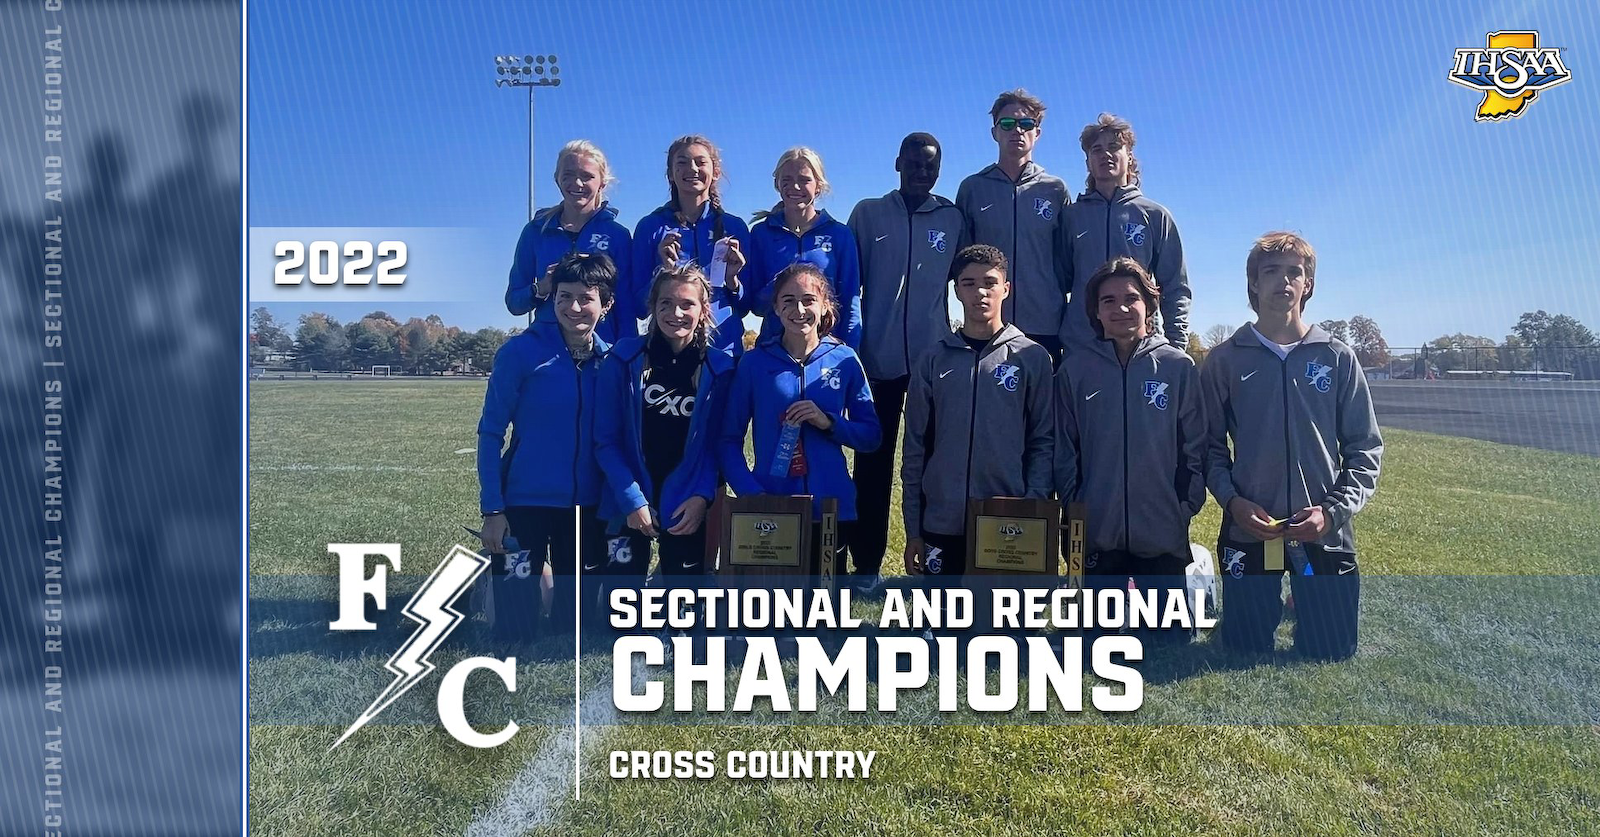 2022 Cross Country - Sectional AND Regional Champions cover photo